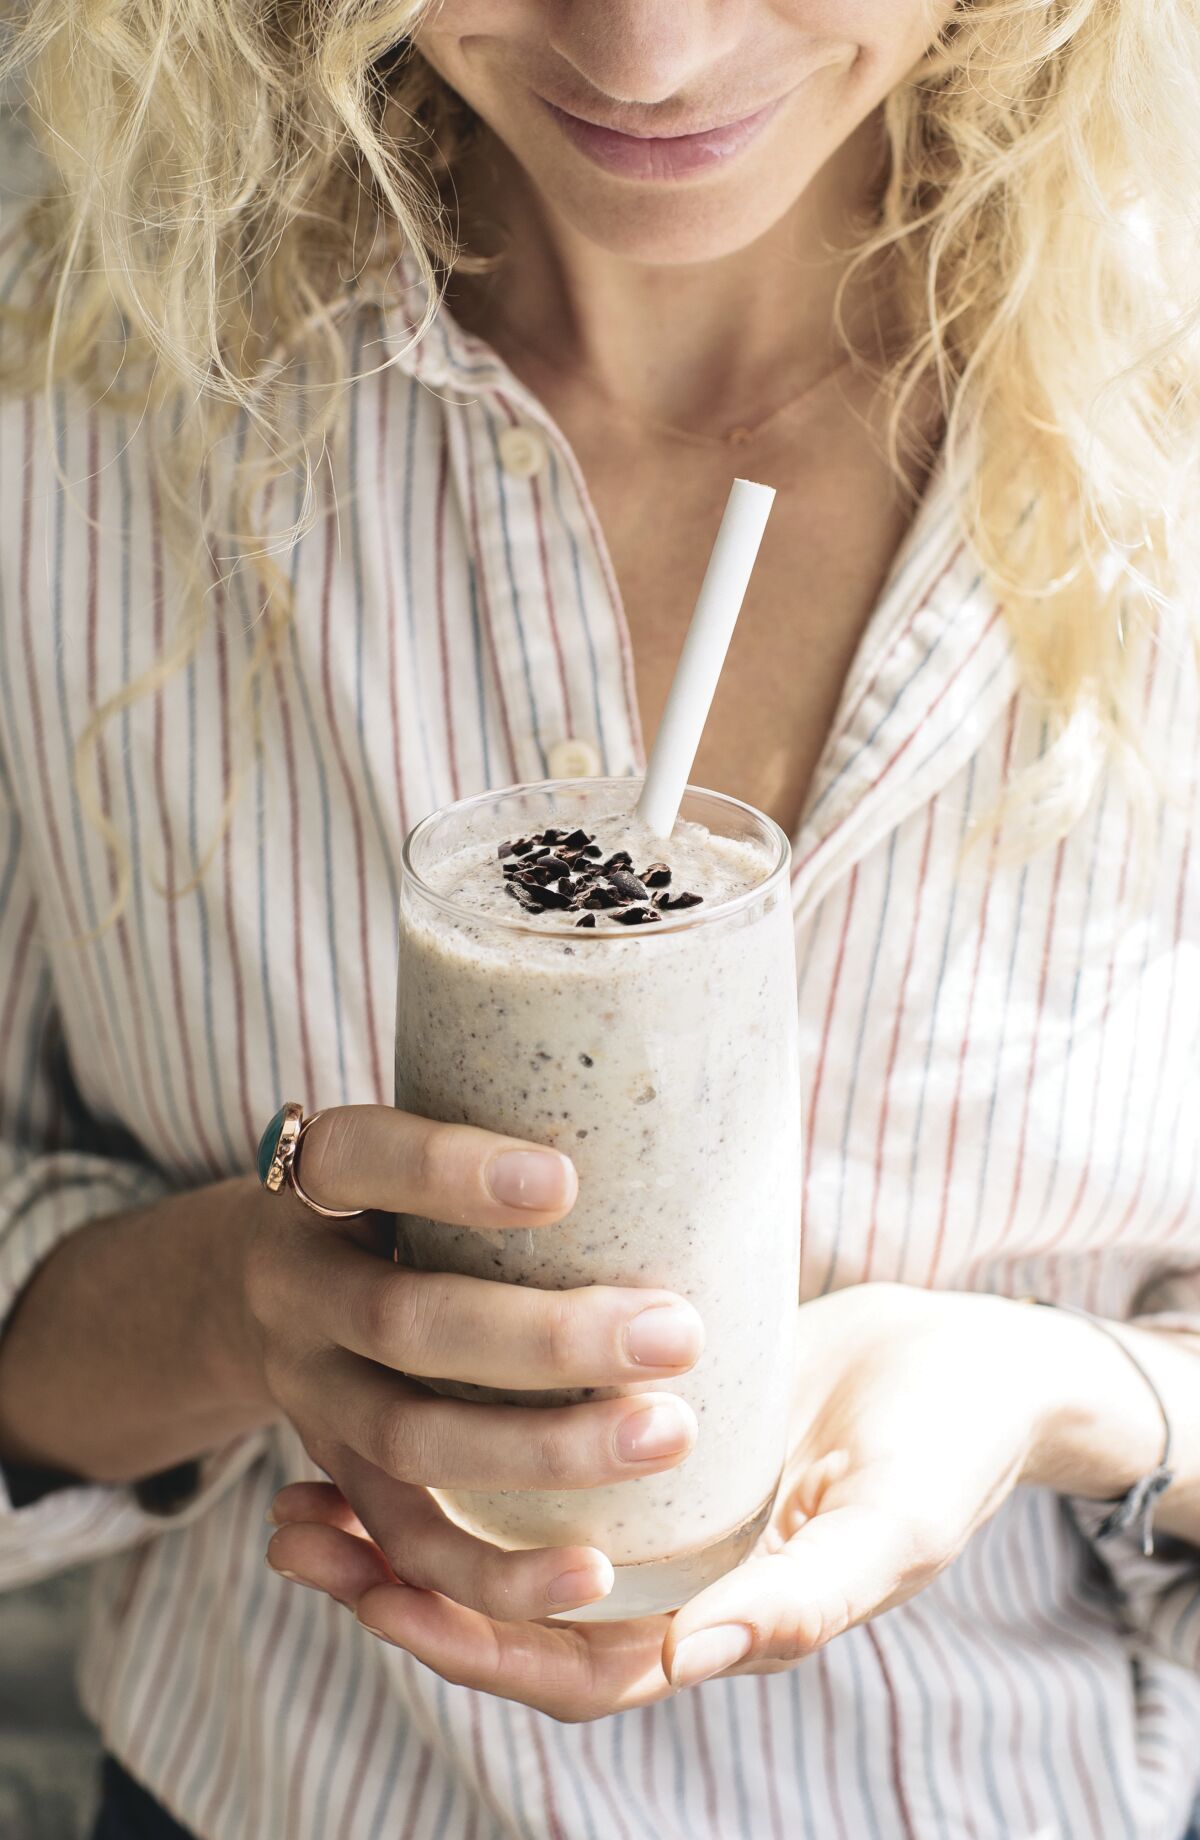 The Decadent Milkshake from Cafe Gratitude is made with coconut ice cream and almond butter.